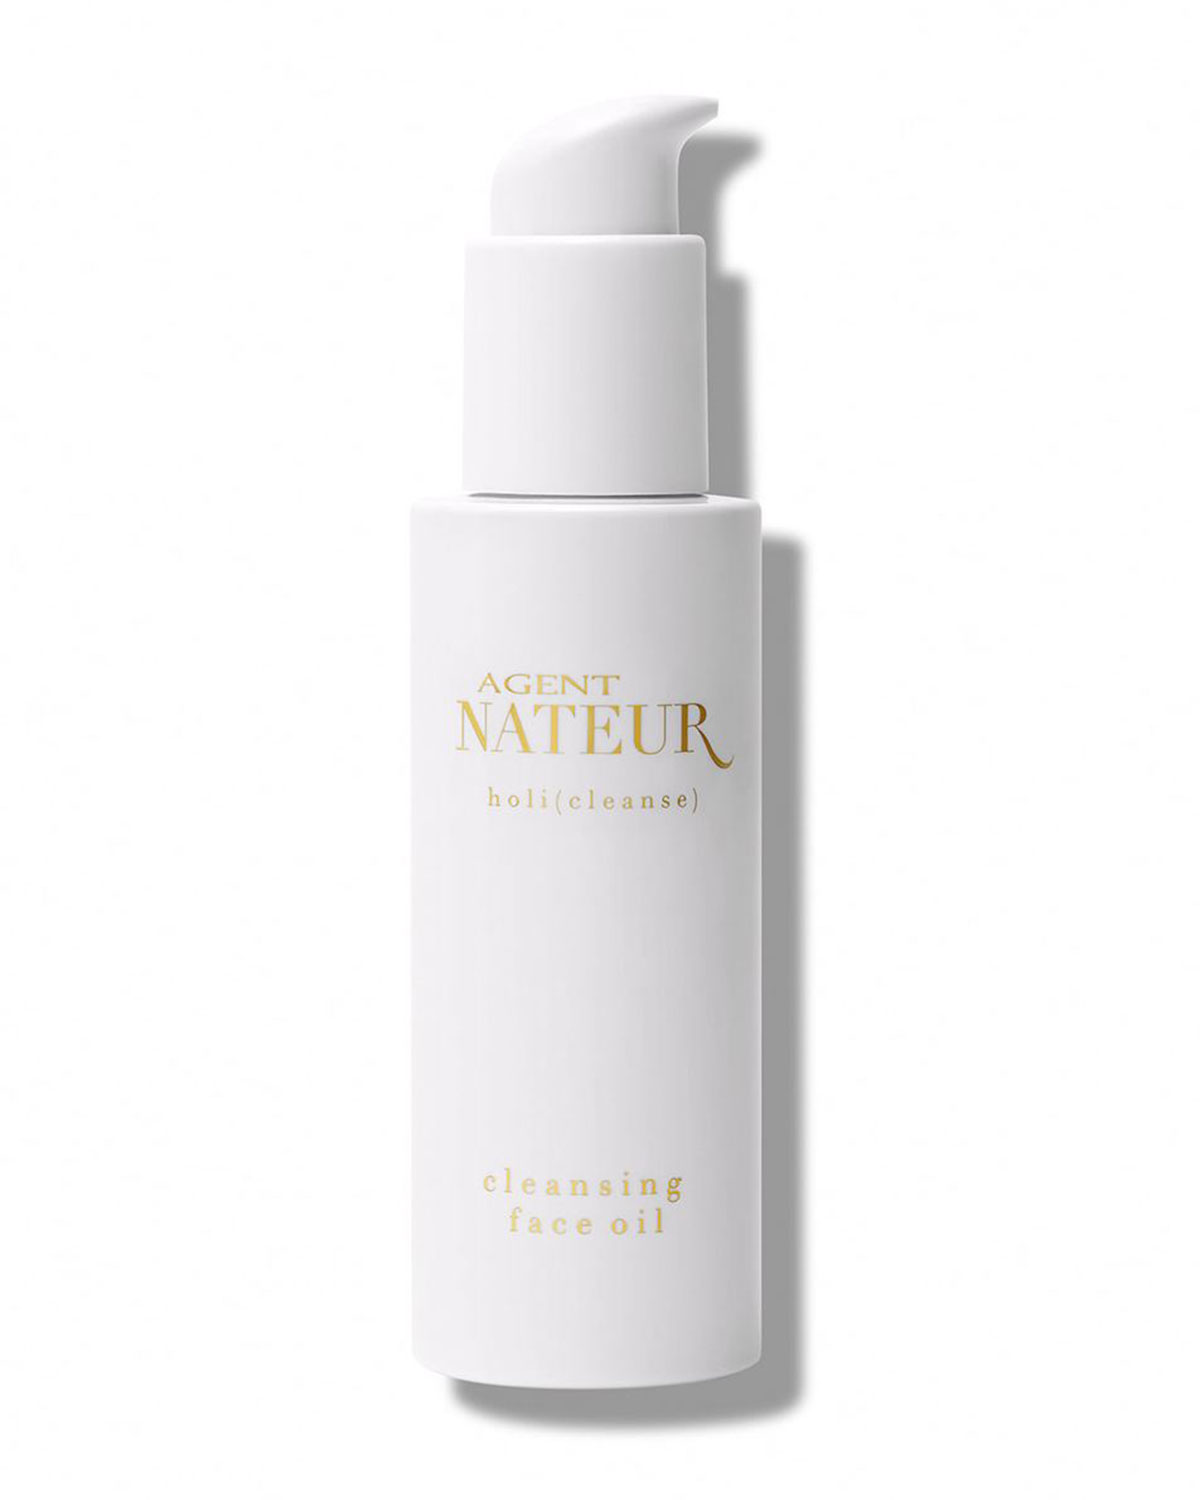 Agent Nateur Holi (cleanse) Cleansing Face Oil Makeup Remover